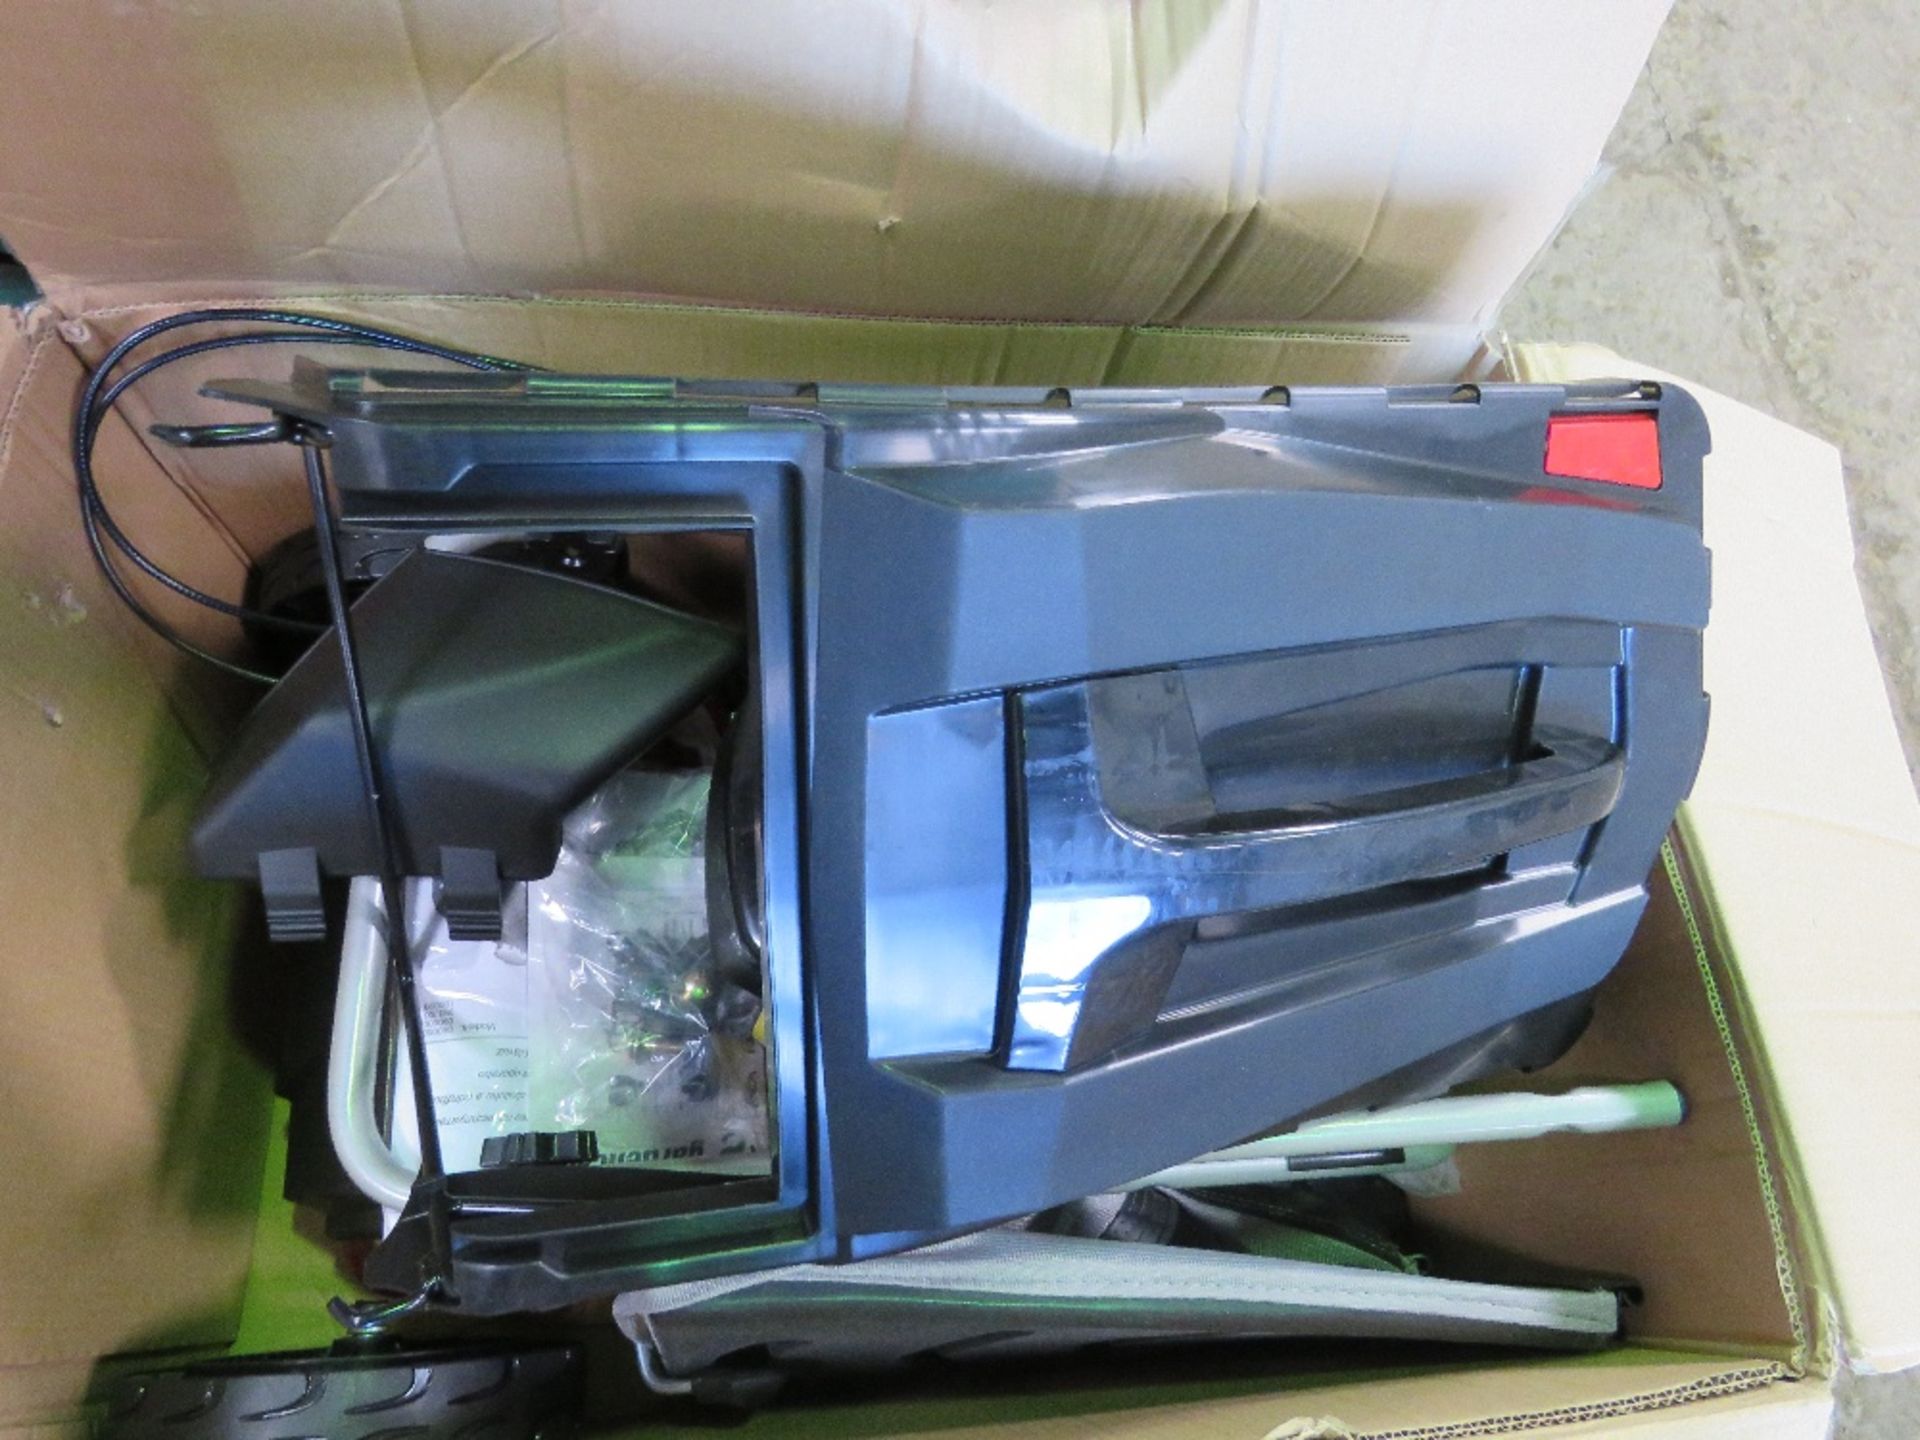 GARDENCARE LMX46P PETROL ENGINED MOWER, UNUSED IN A BOX. - Image 2 of 8